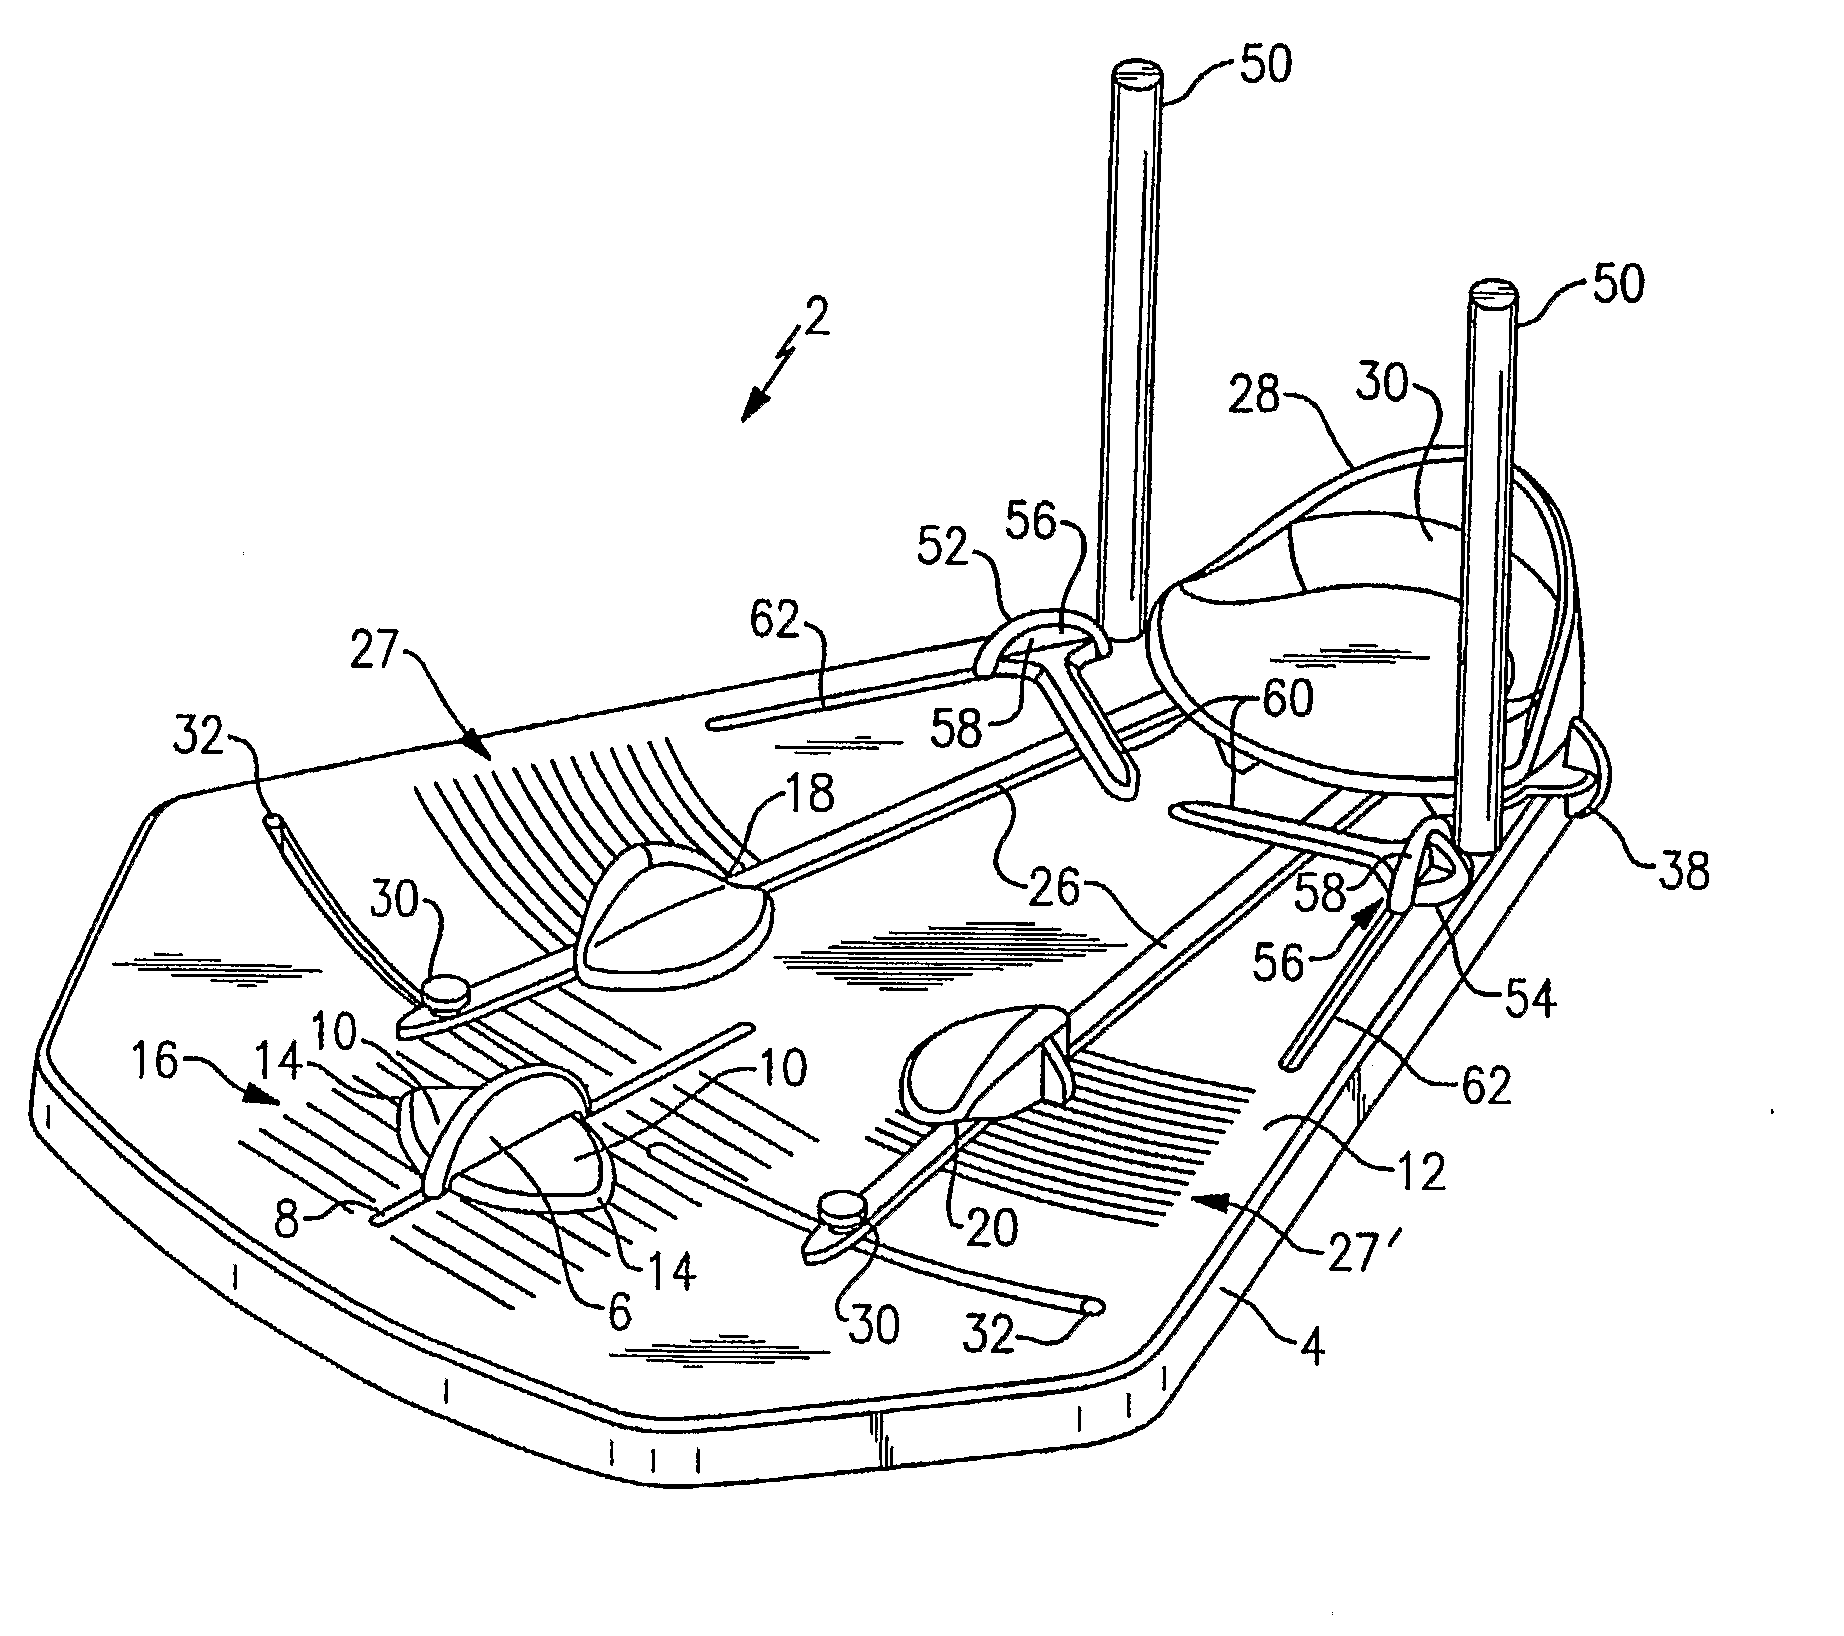 Foot Measurement, Alignment and Evaluation Device